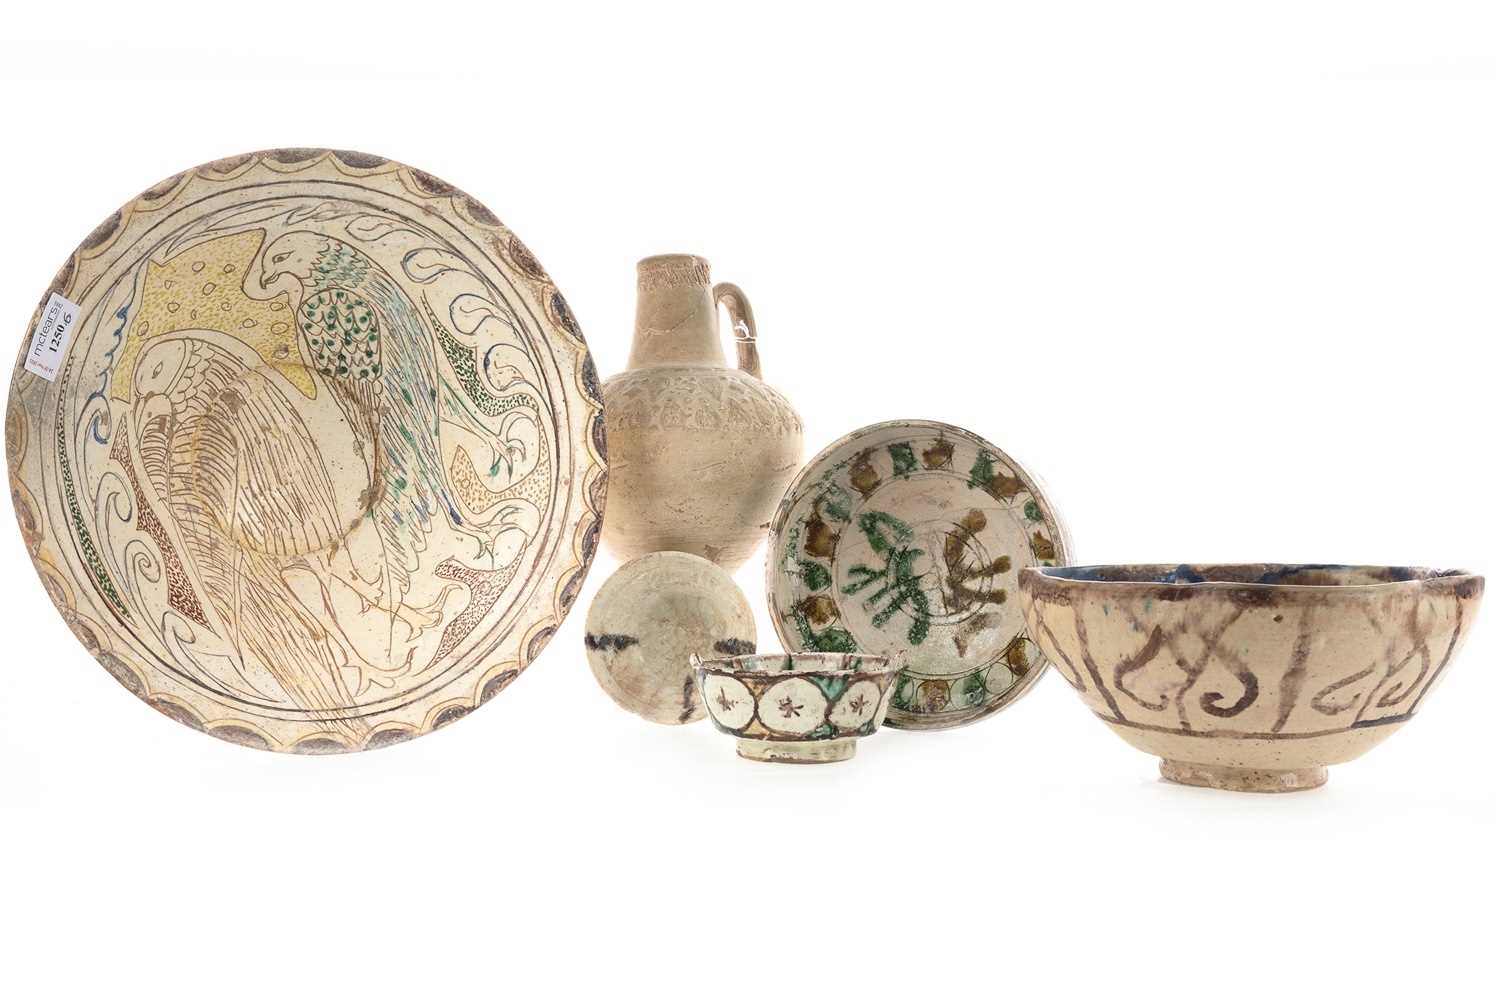 Lot 1250 - A LOT OF FIVE MIDDLE EASTERN POTTERY BOWLS AND AN INDIAN BUFF POTTERY JUG